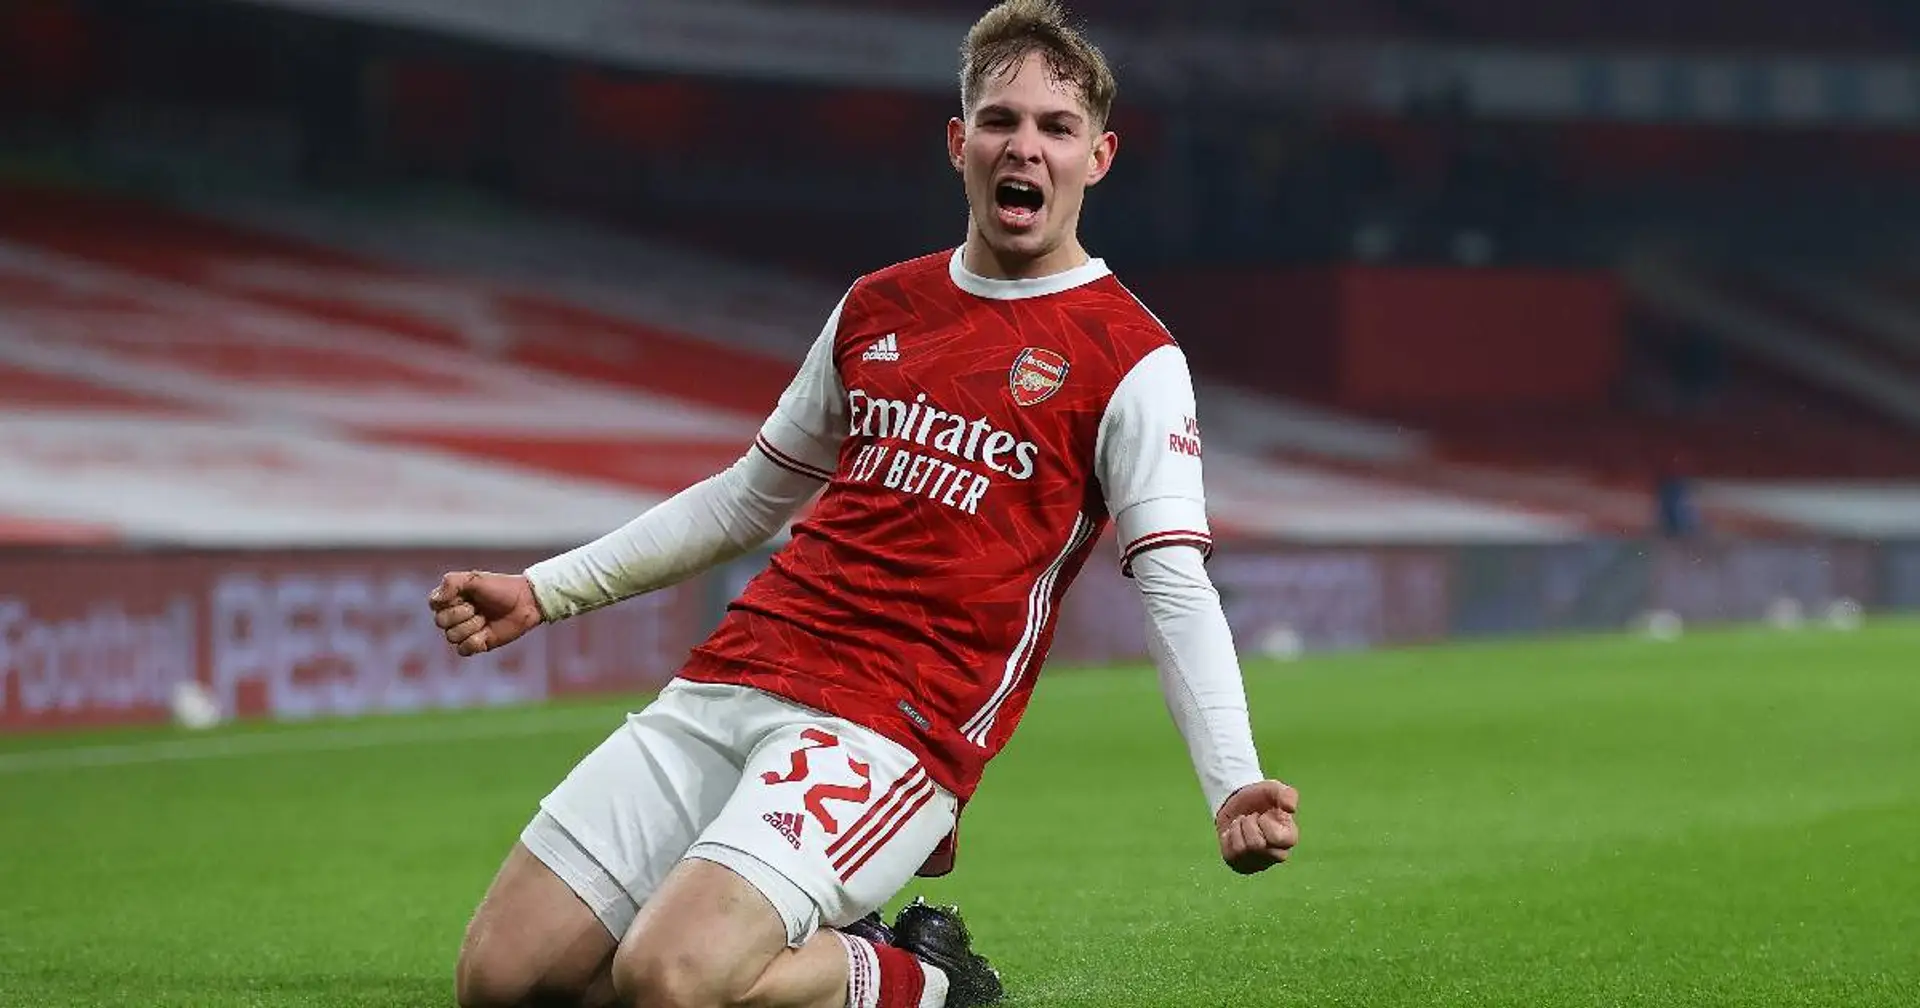 'We believe in him and he's playing really well': Arteta applauds Smith Rowe's form and importance to squad